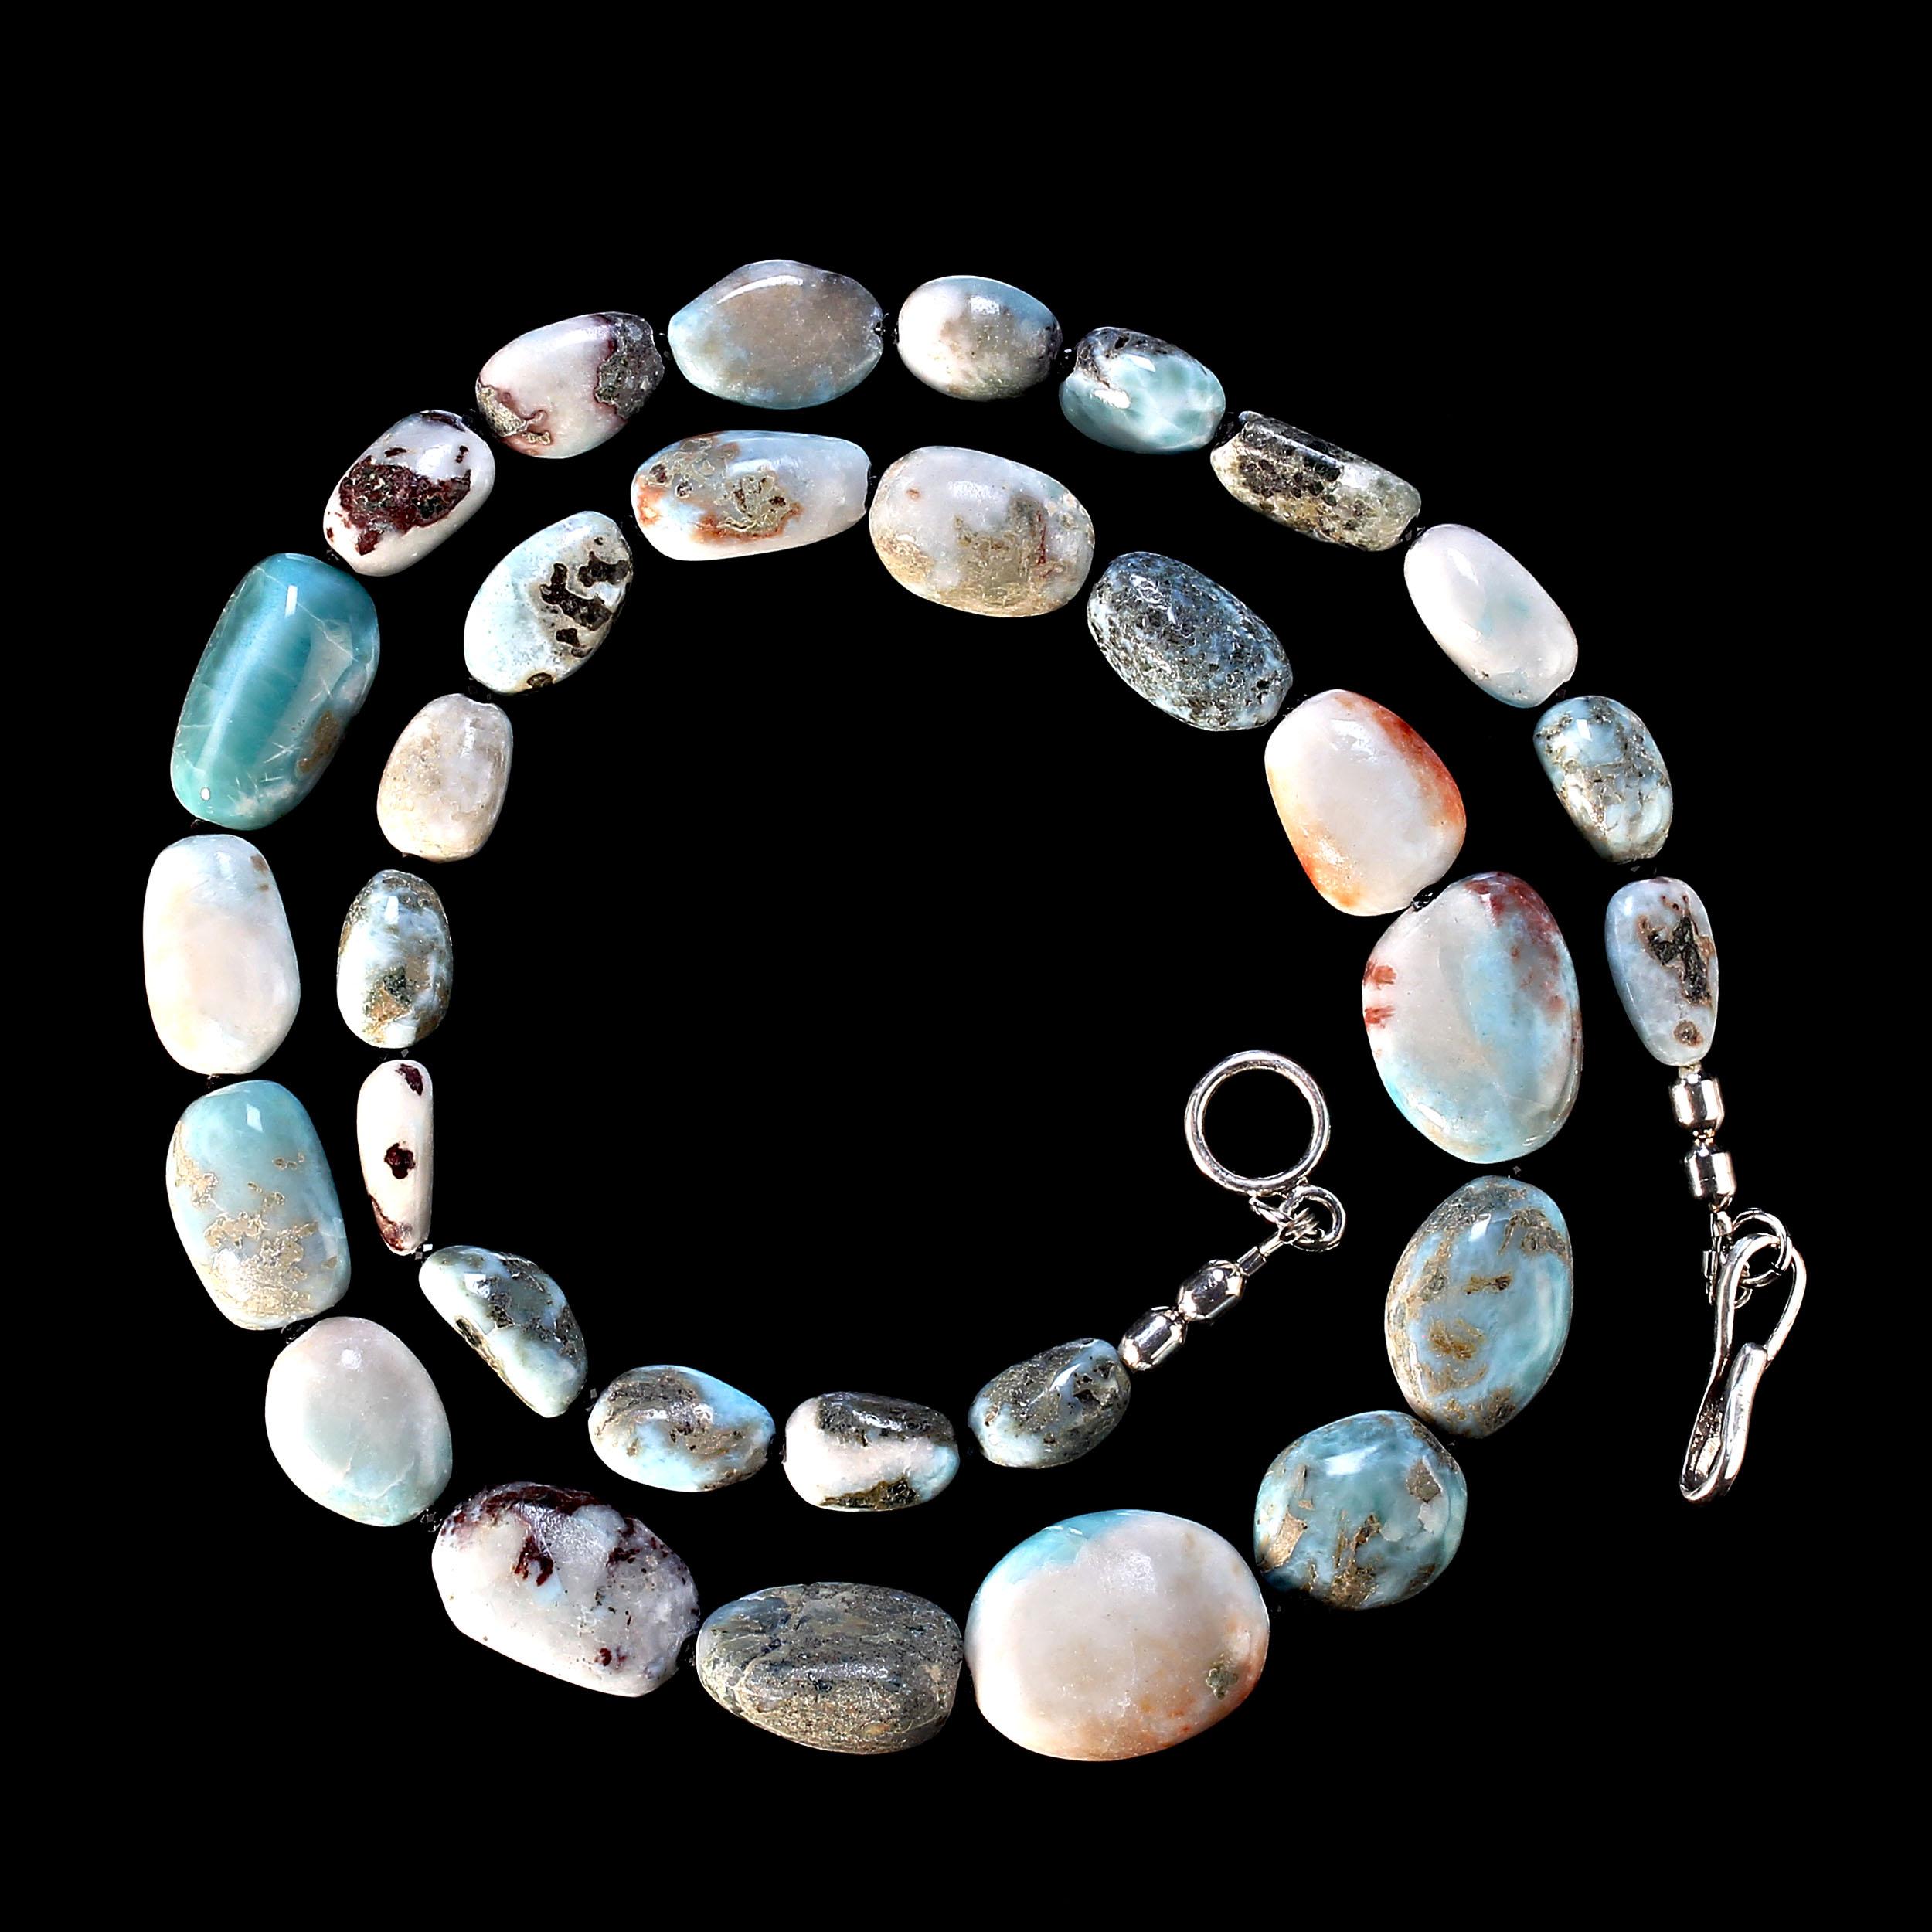 23 Inch polished graduated, 13 to 23MM, Larimar necklace with a silver hook and eye clasp. This is lovely Larimar, each gemstone is unique with blue, white, gray, and brown features. Larimar is an opaque gemstone only found around the town of